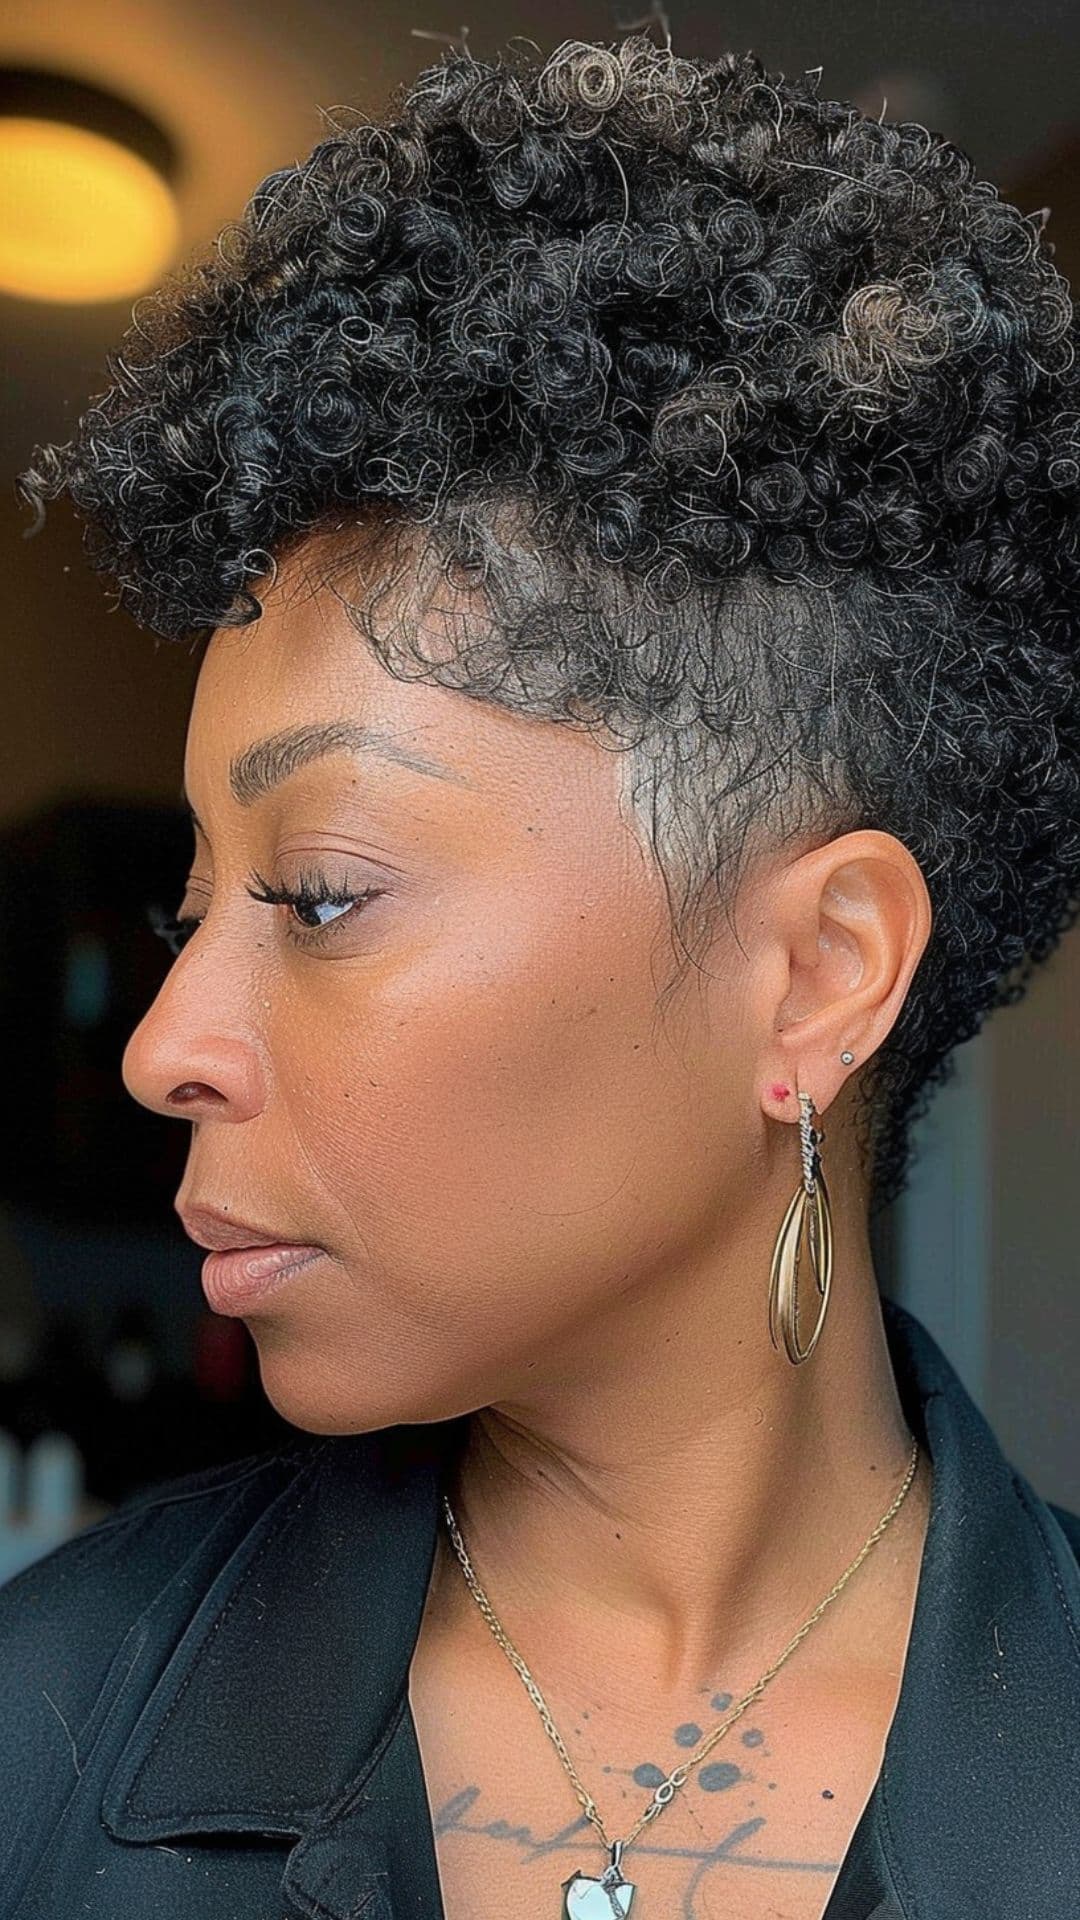 An older black woman modelling a tapered natural cut.